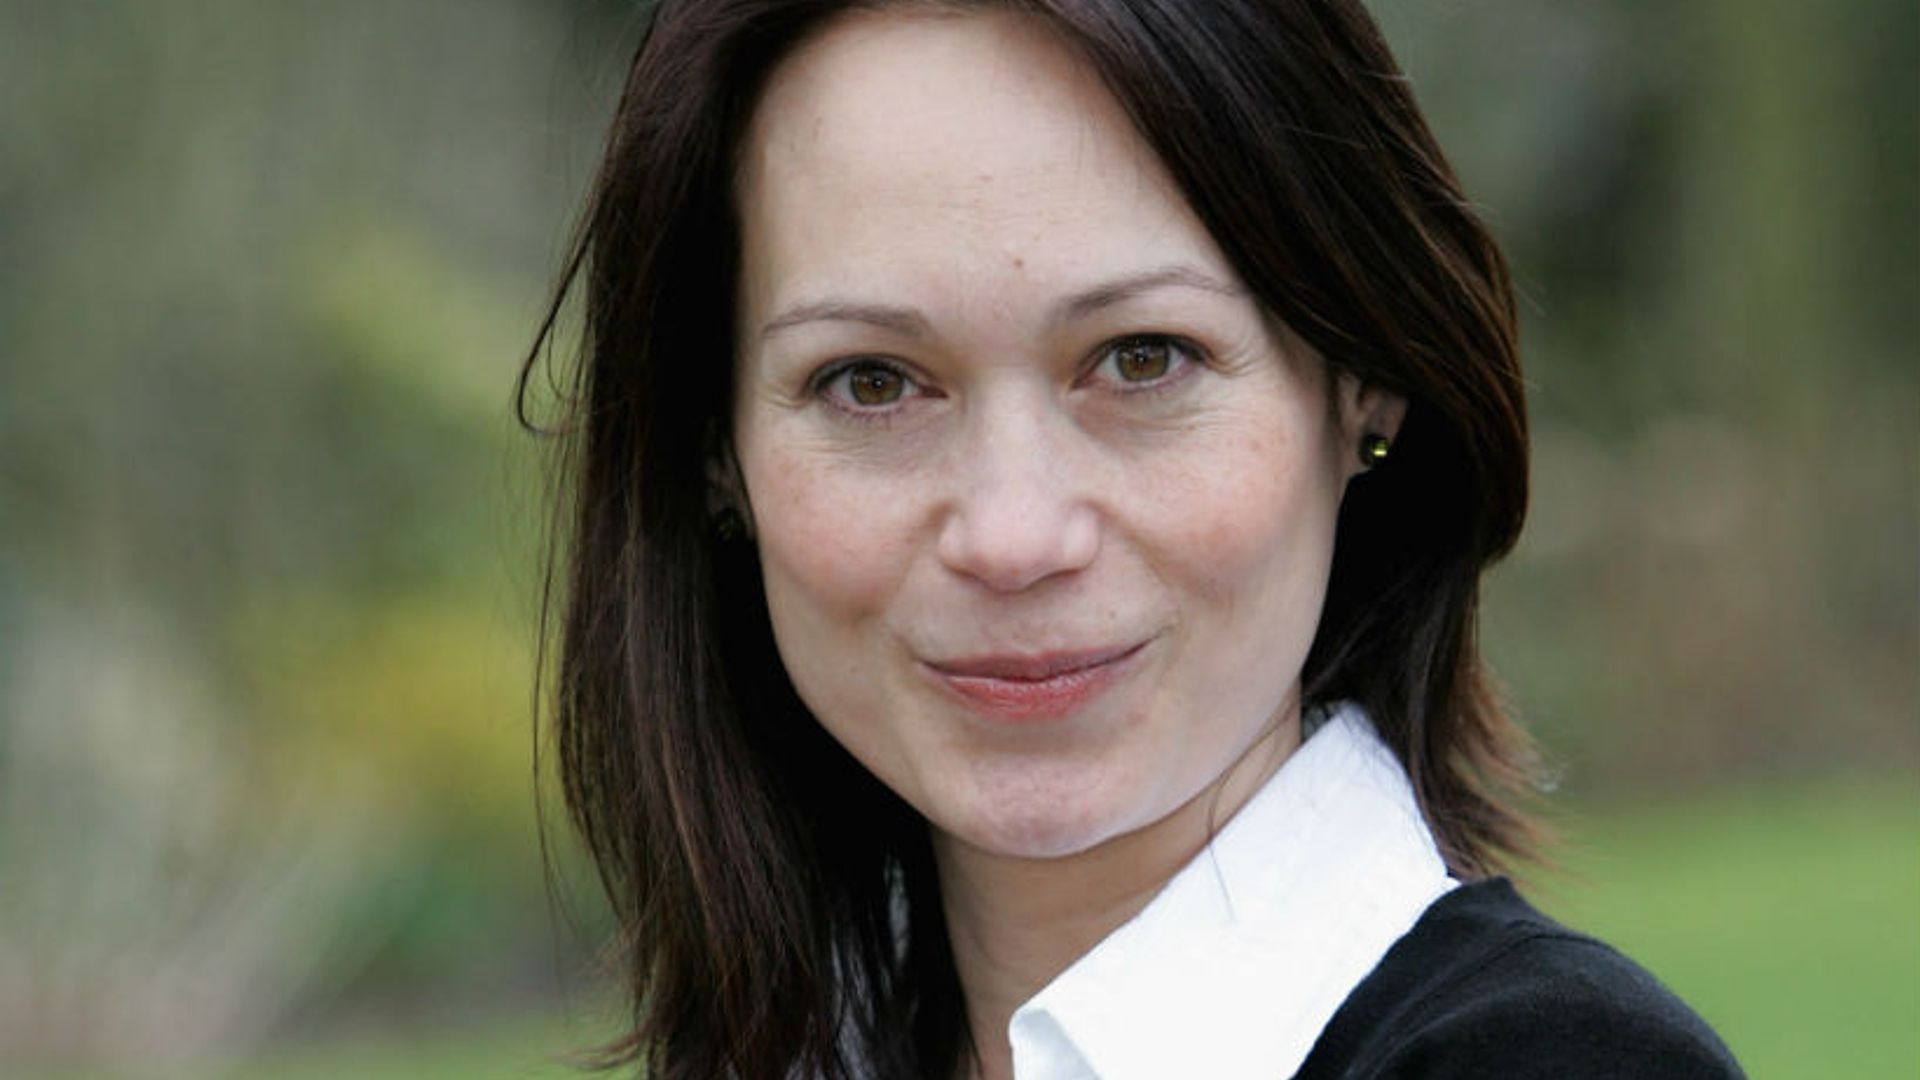 Emmerdale S Leah Bracknell Opens Up About Health Following Terminal Cancer Diagnosis Hello